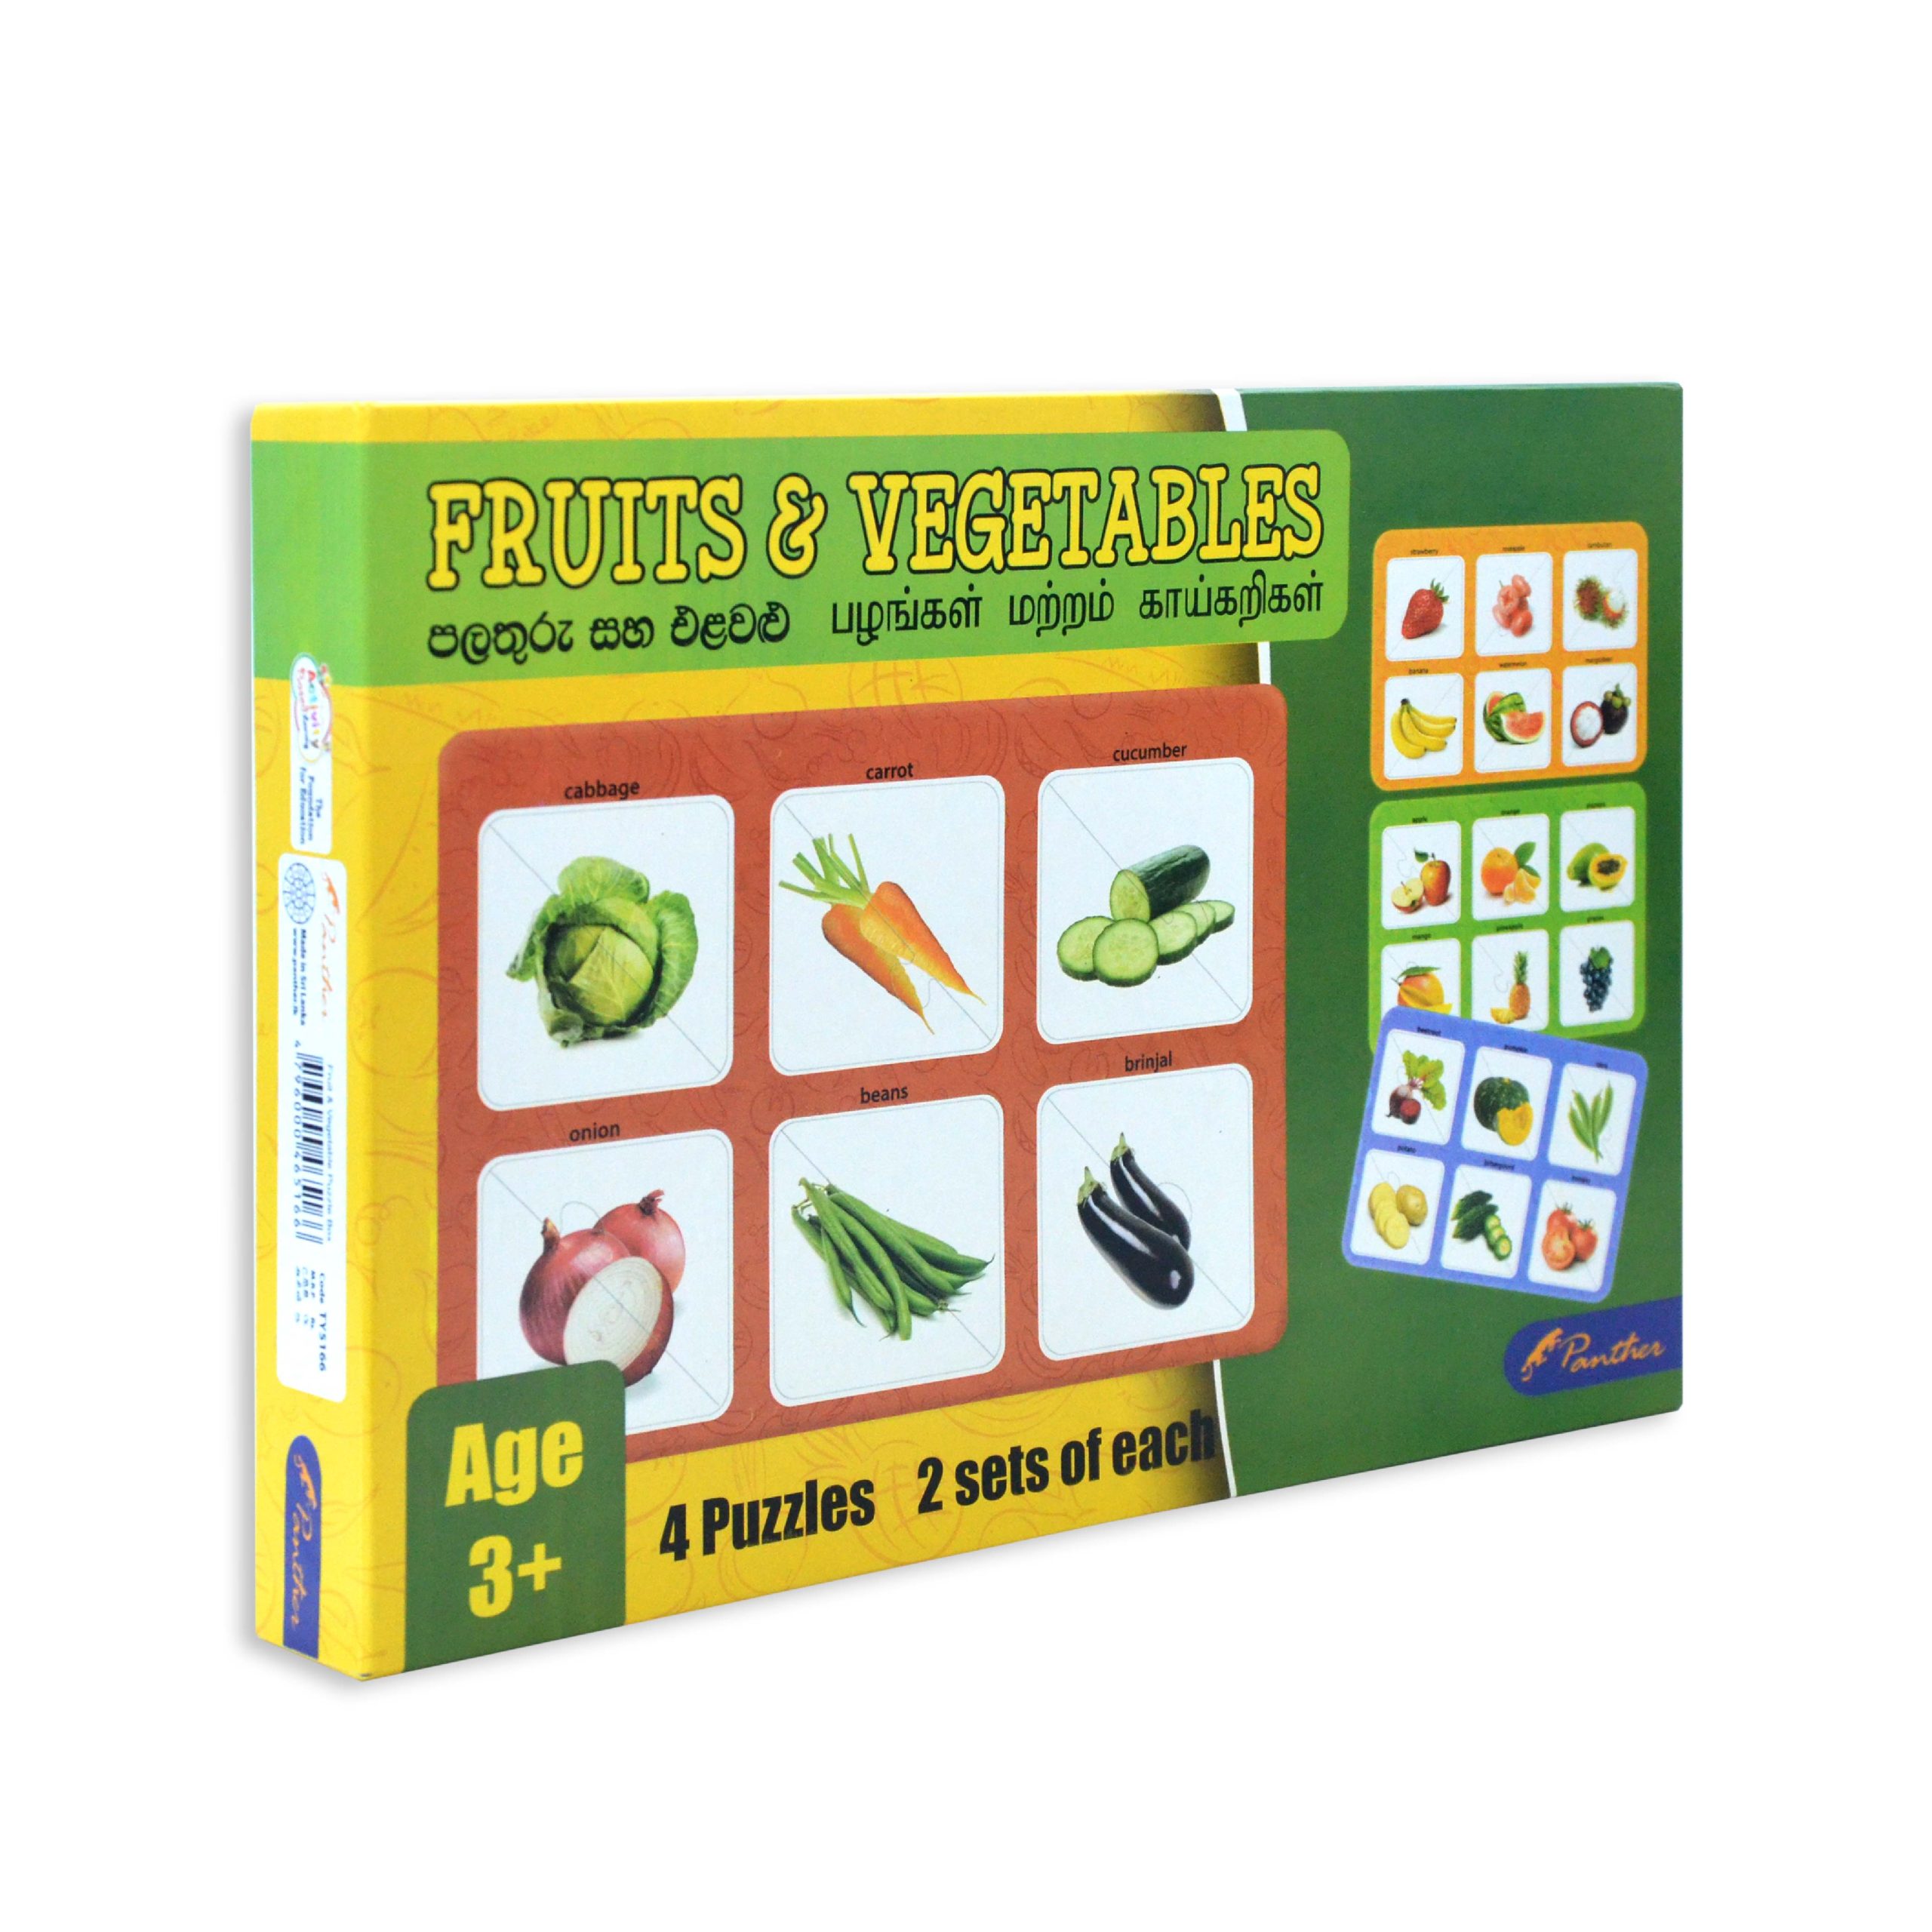 TY5166 FRUITS VEGETABLES BOX 01 scaled